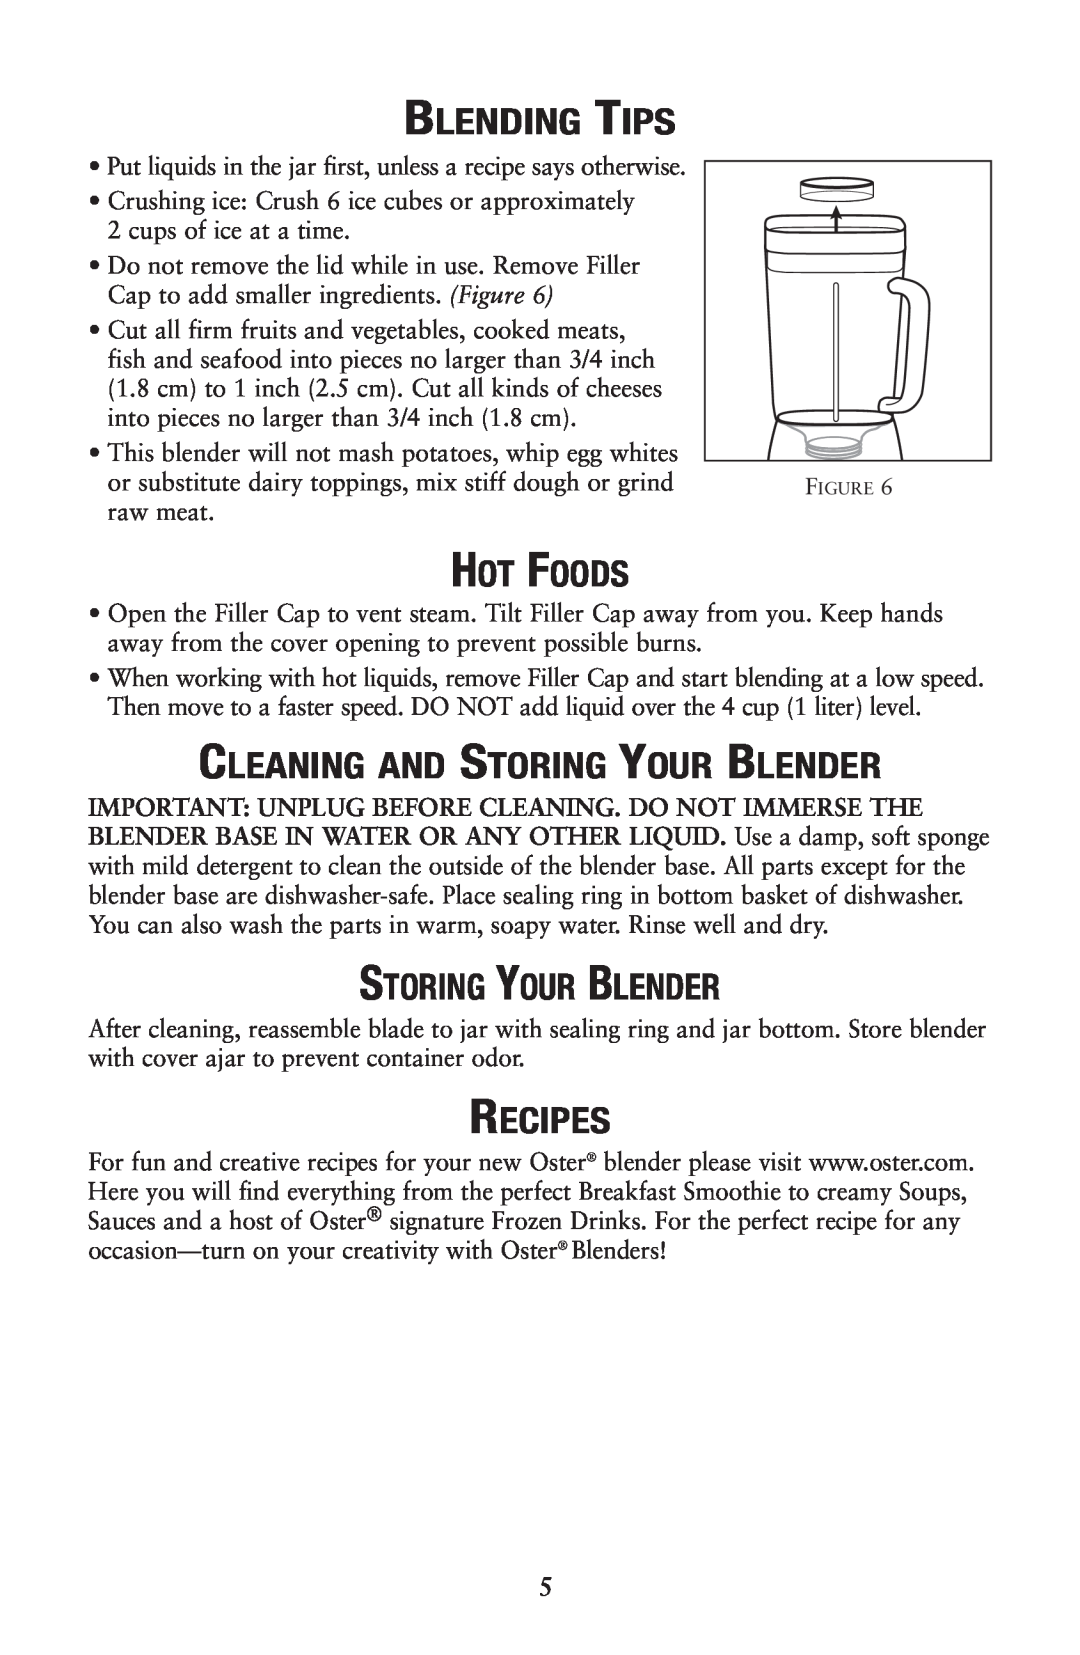 Oster P.N. 133086 user manual Blending Tips, Hot Foods, Cleaning And Storing Your Blender, Recipes 